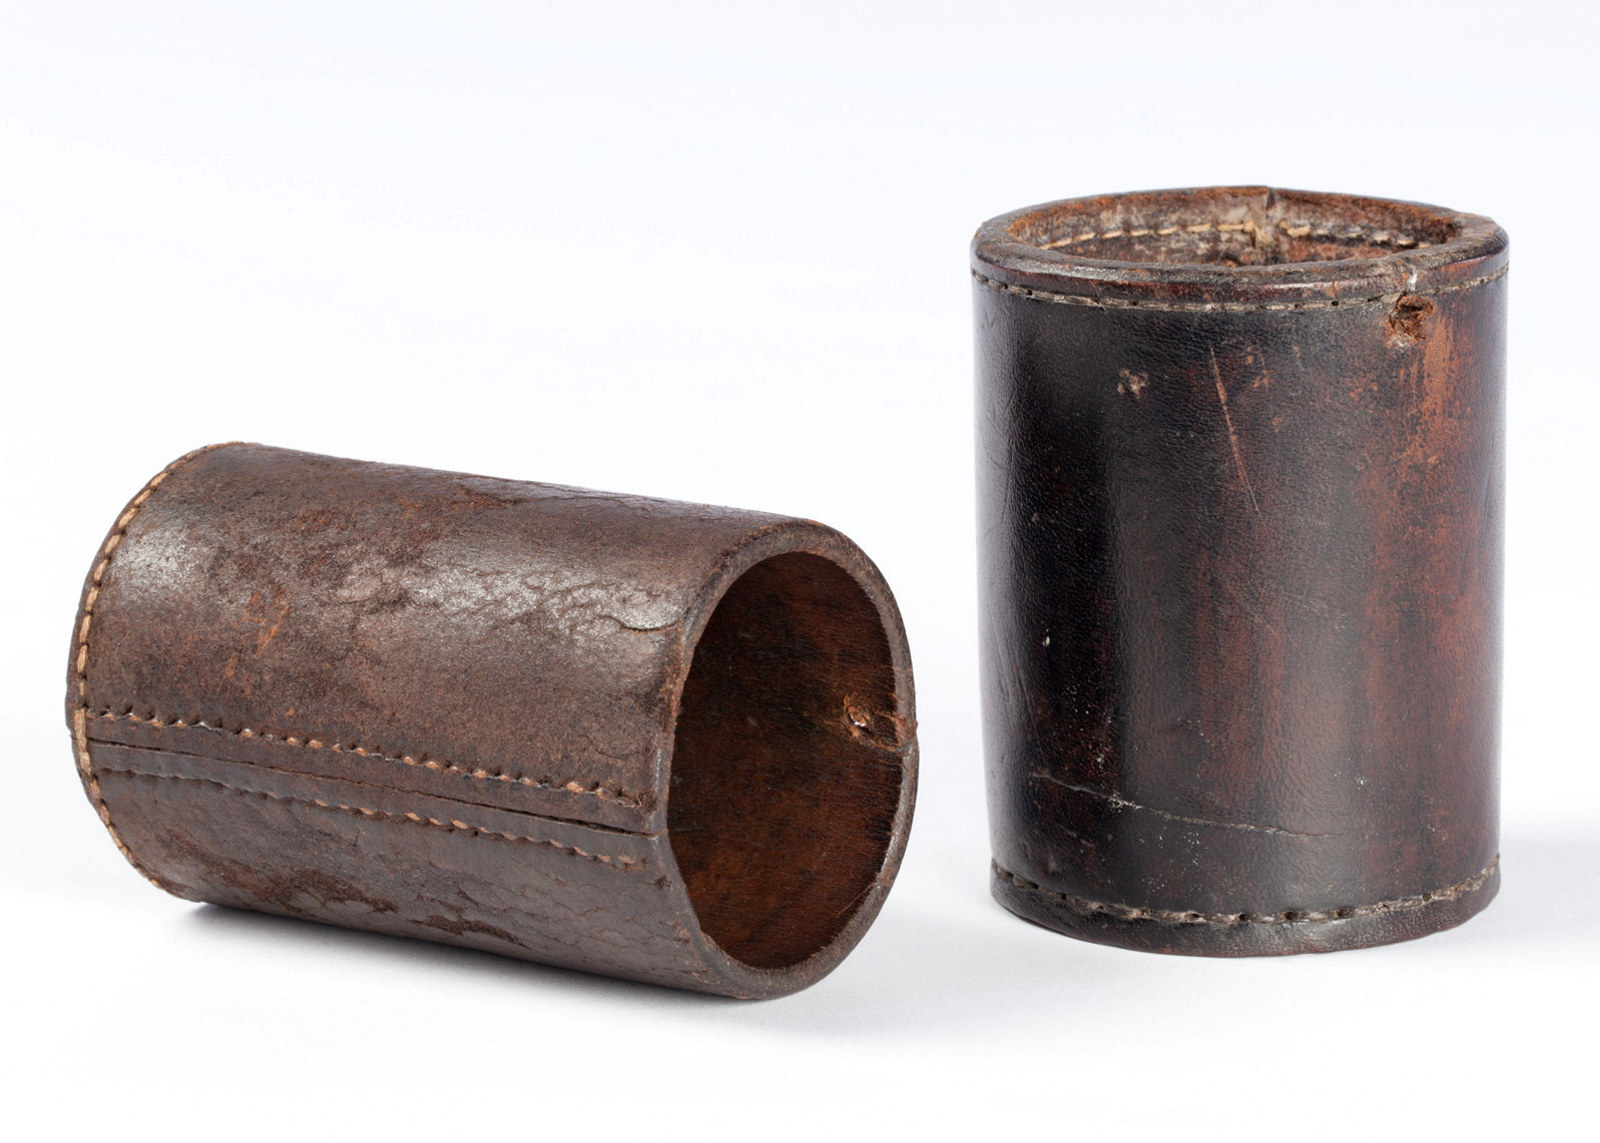 Two dice shakers made of stitched leather, circa 1933